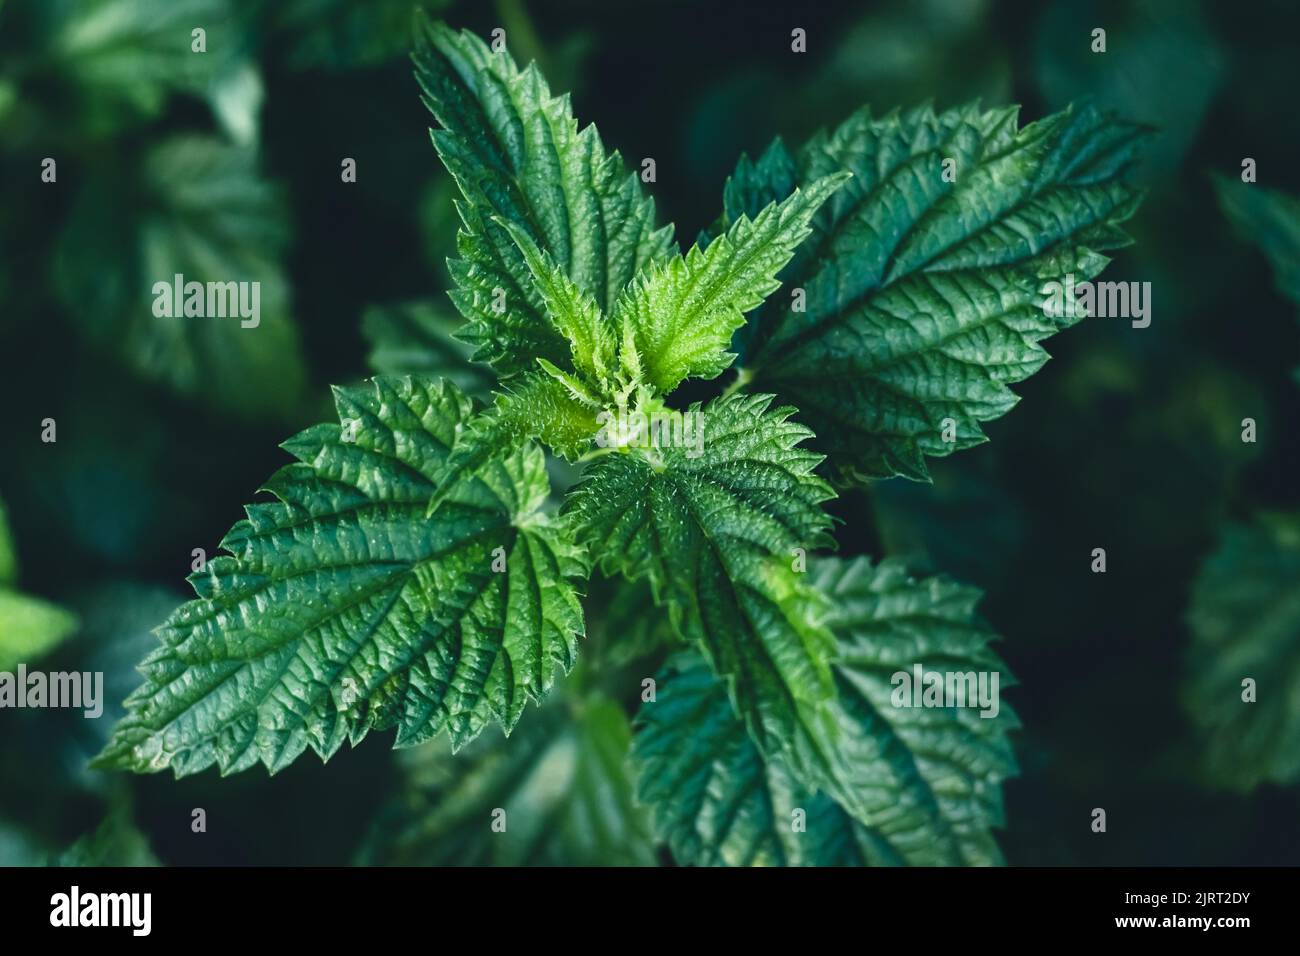 Common nettle bush outdoors. Urtica dioica. Stinging nettles plant. Herbal medicine concept. Green foliage background. Dark leaves pattern at night. T Stock Photo